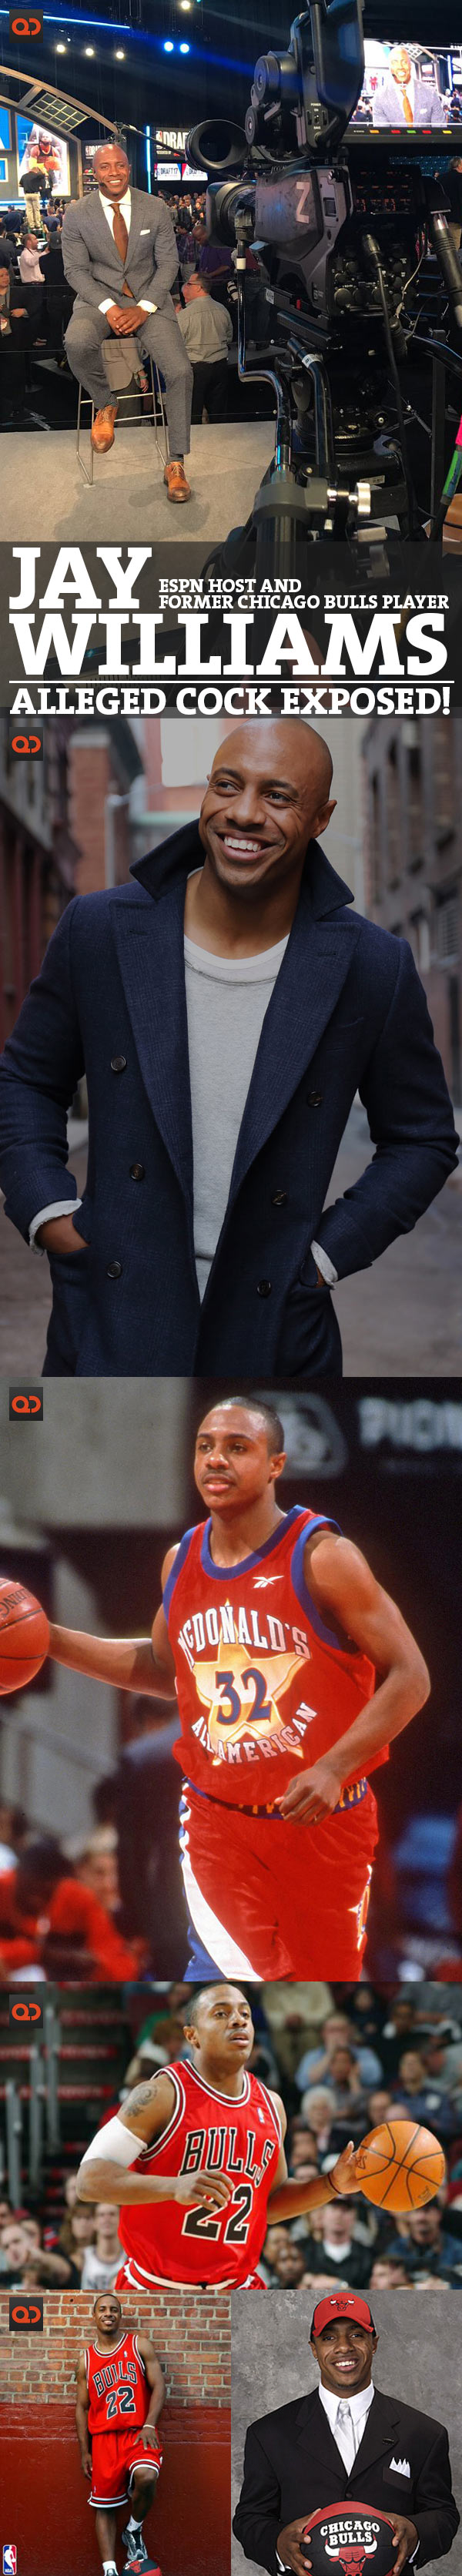 Jay Williams, ESPN Host And Former Chicago Bulls Player, Alleged Cock Exposed!